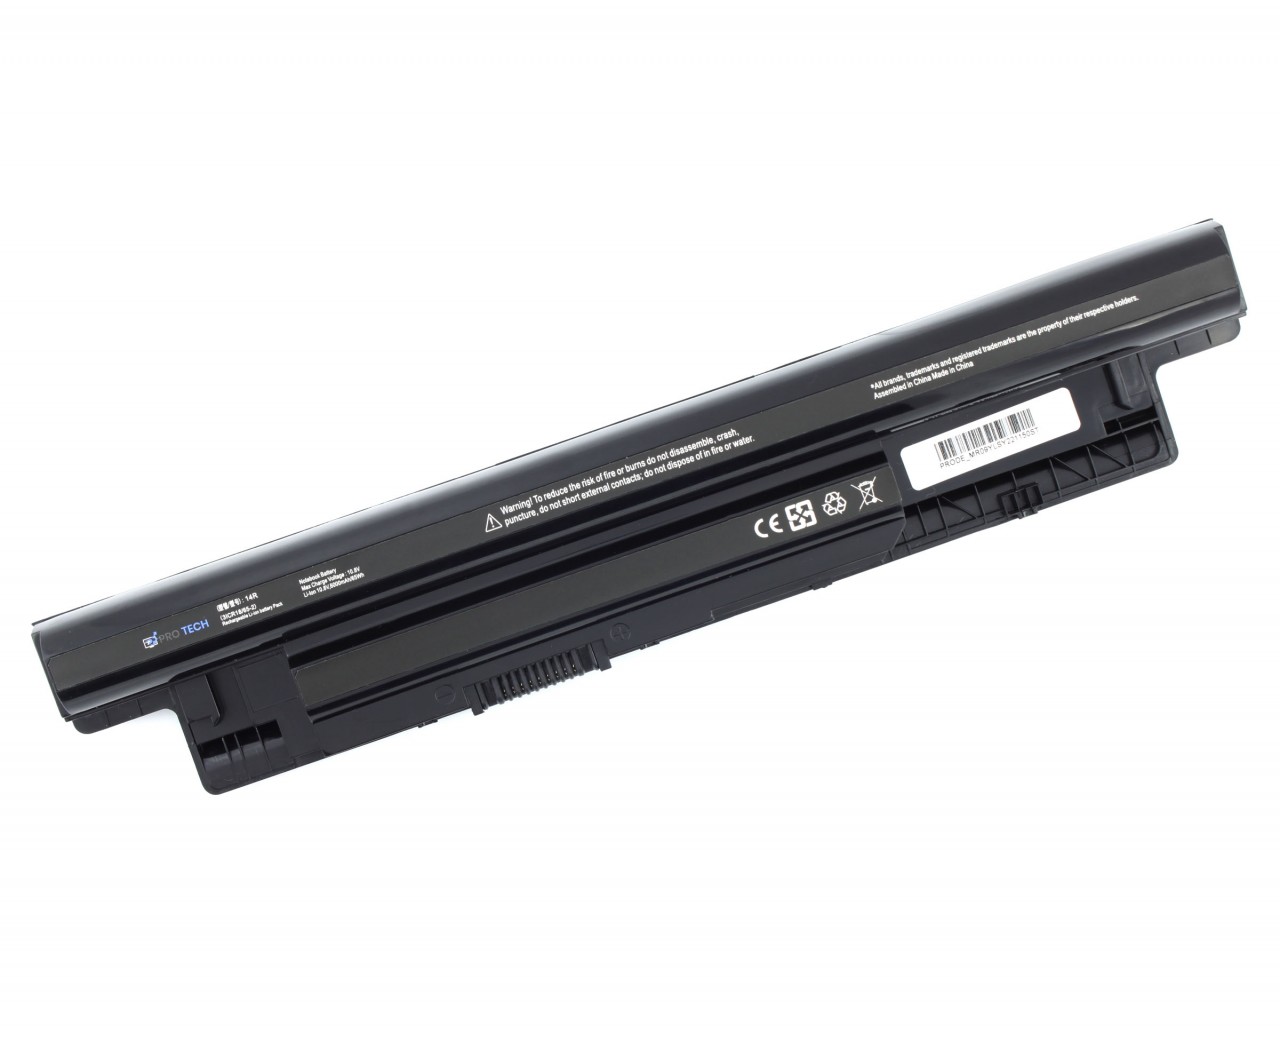 Baterie Dell Inspiron 3541 65Wh Protech High Quality Replacement